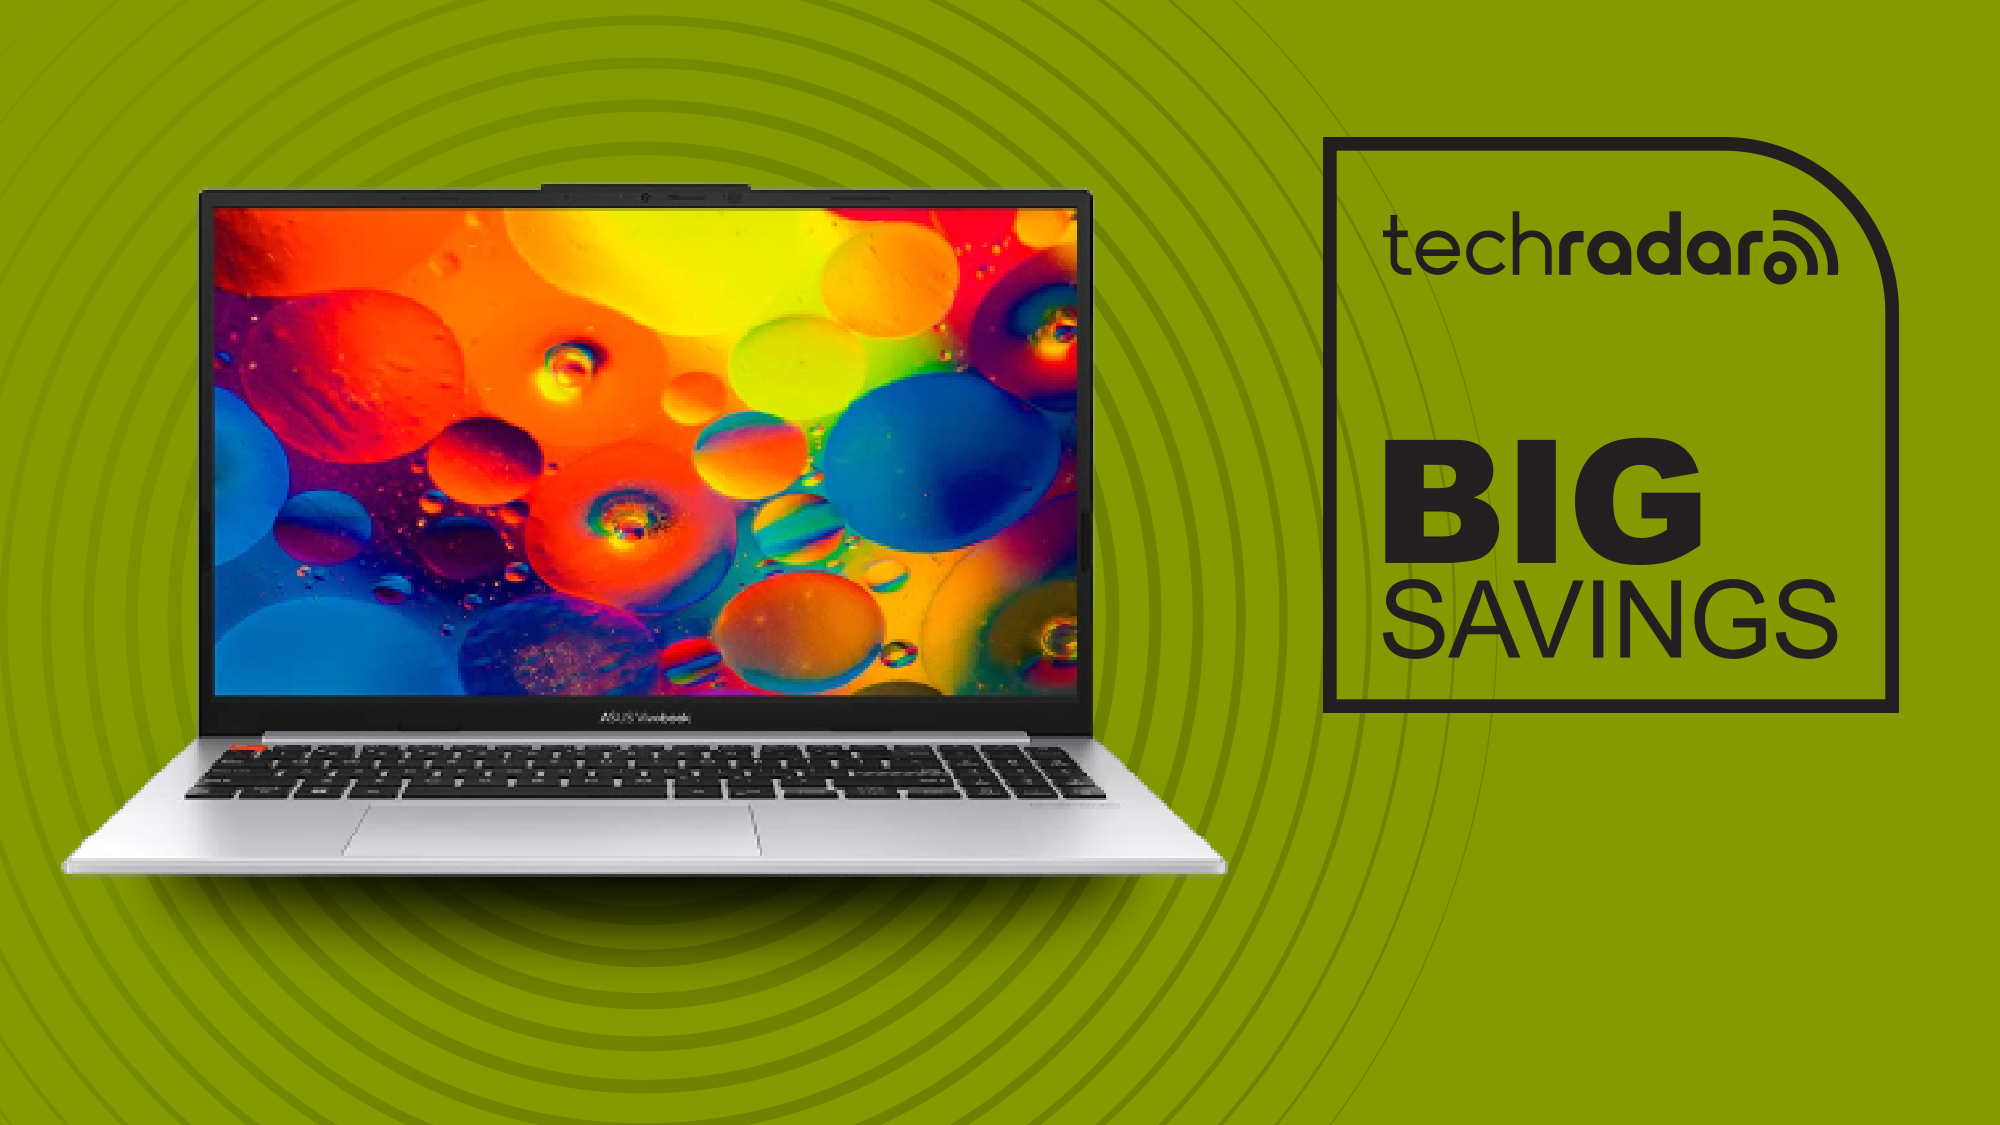 Unleash Your Creativity With This Big Black Friday Deal On The Asus Vivobook S 15 Laptop Techradar 